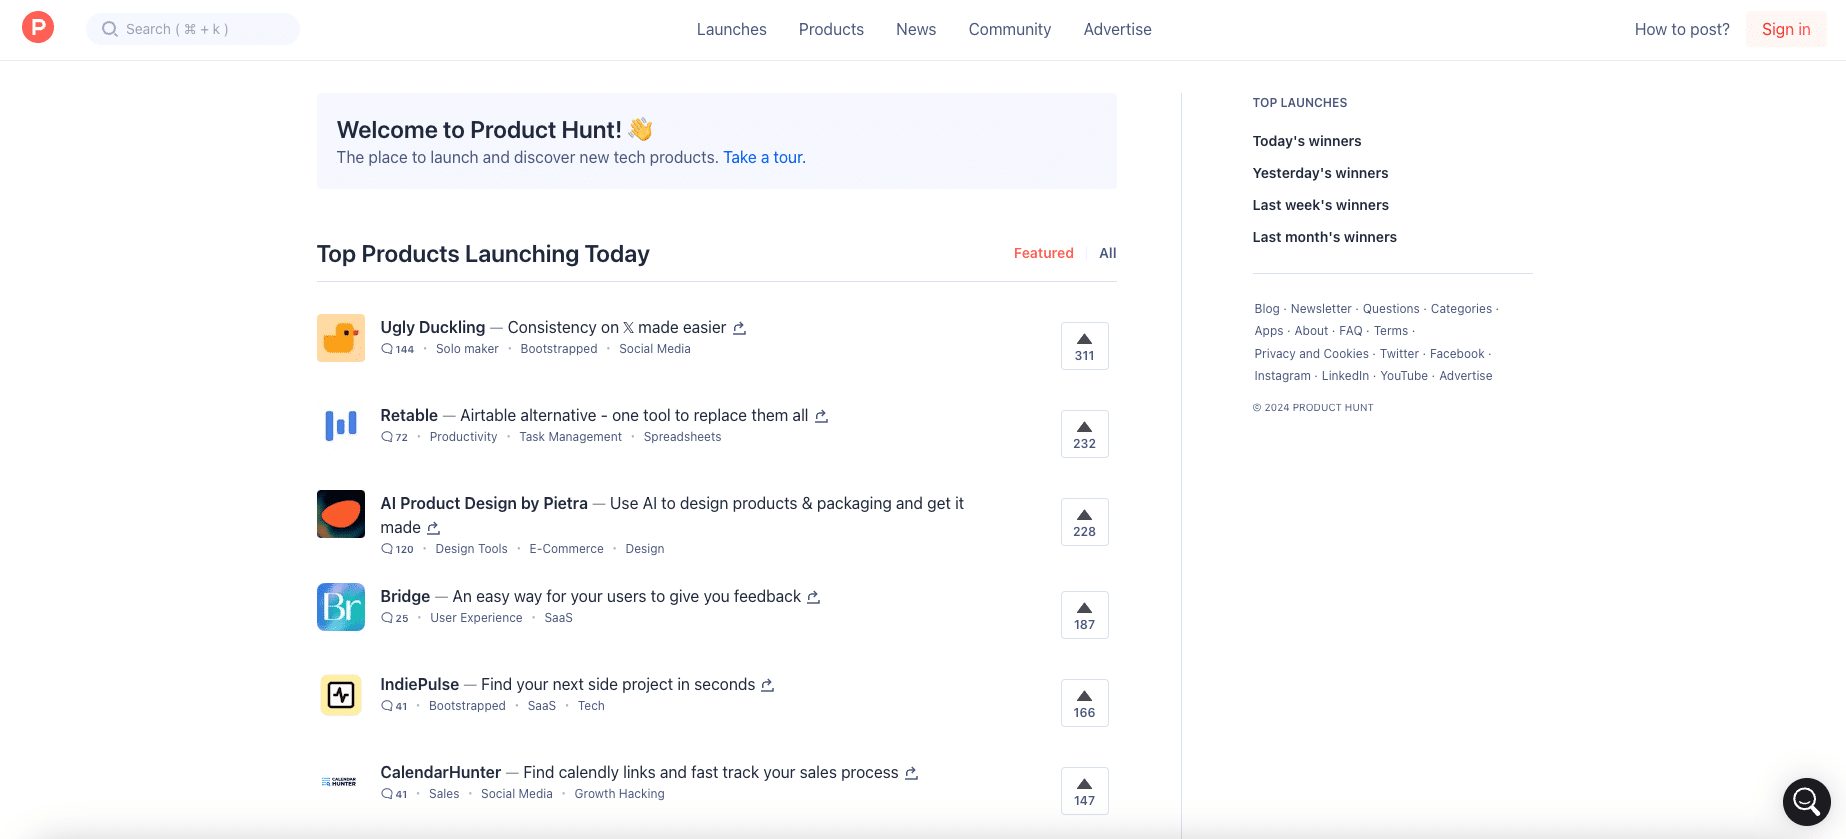 Product Hunt Home Page Overview